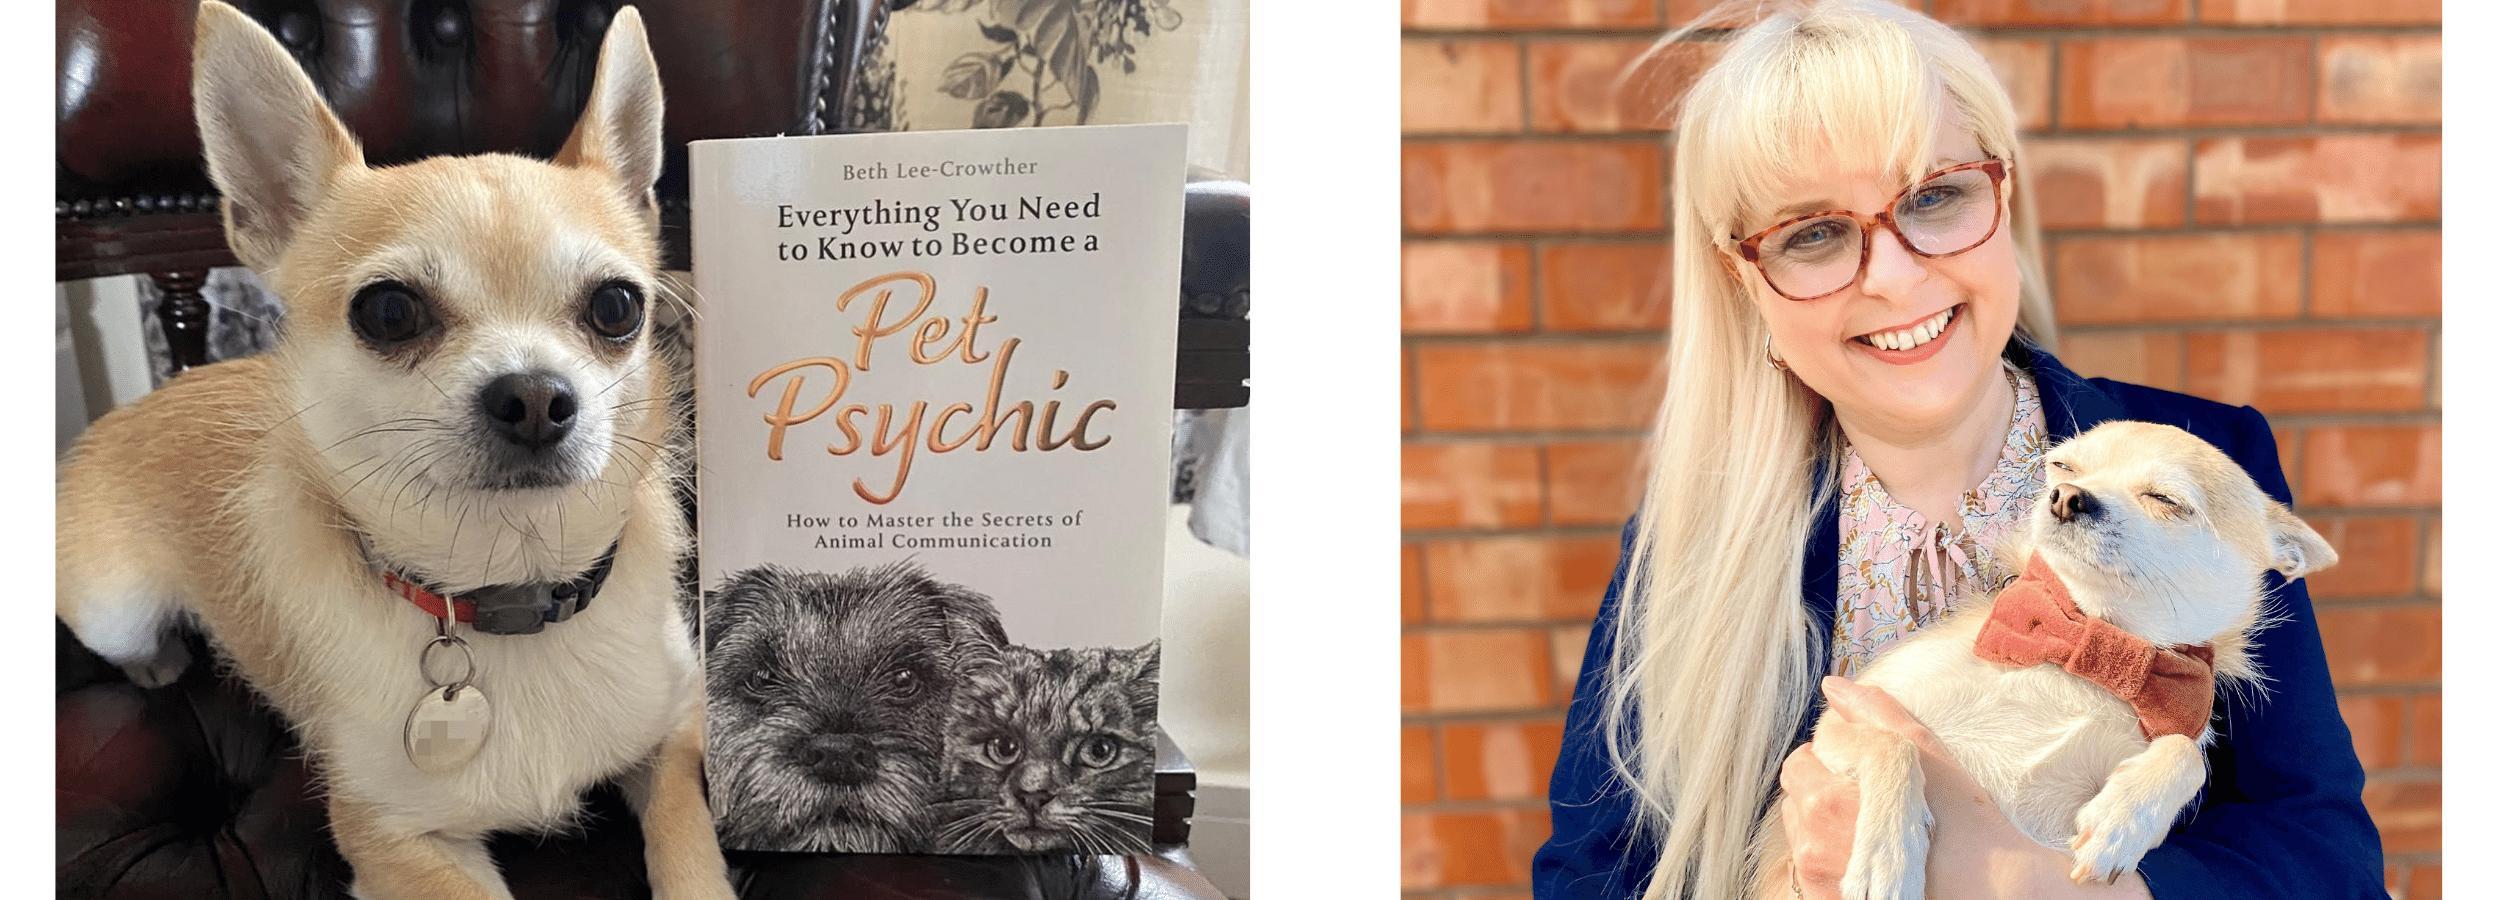 Beth Lee-Crowther and her chihuahua, and Beth's dog with her book, How to Become a Pet Psychic